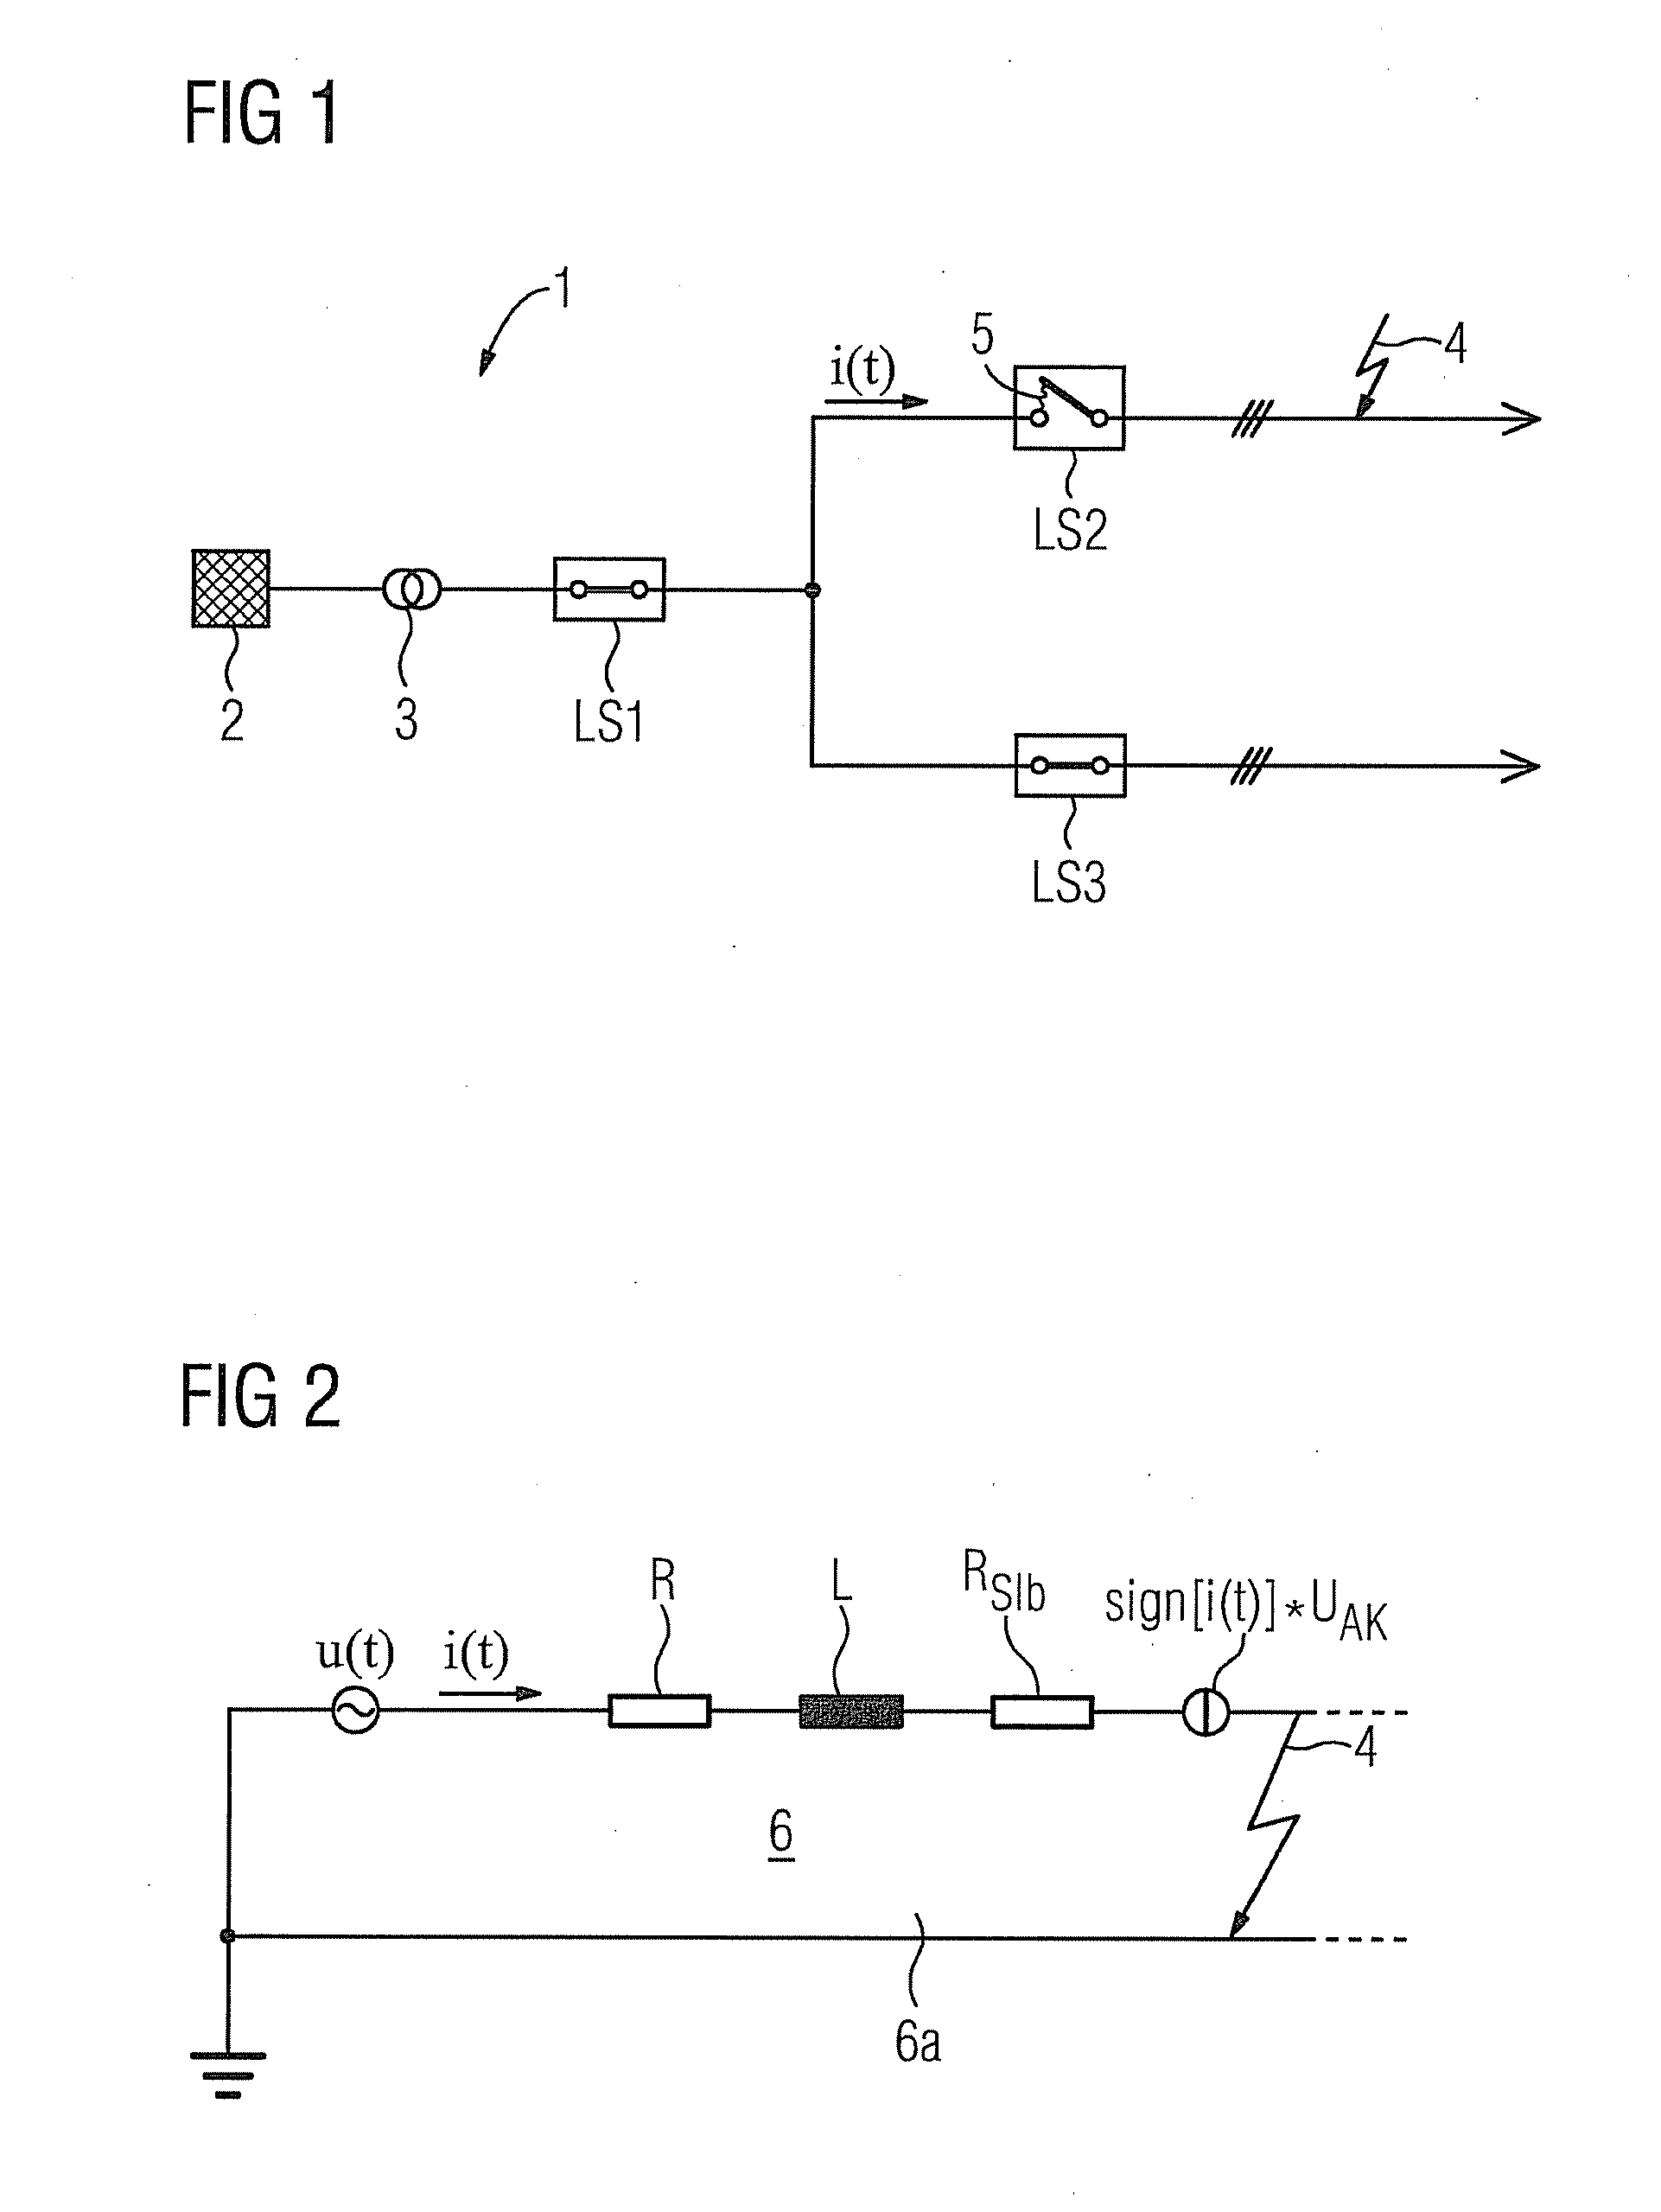 Method for selectively triggering circuit breakers in the event of a short circuit